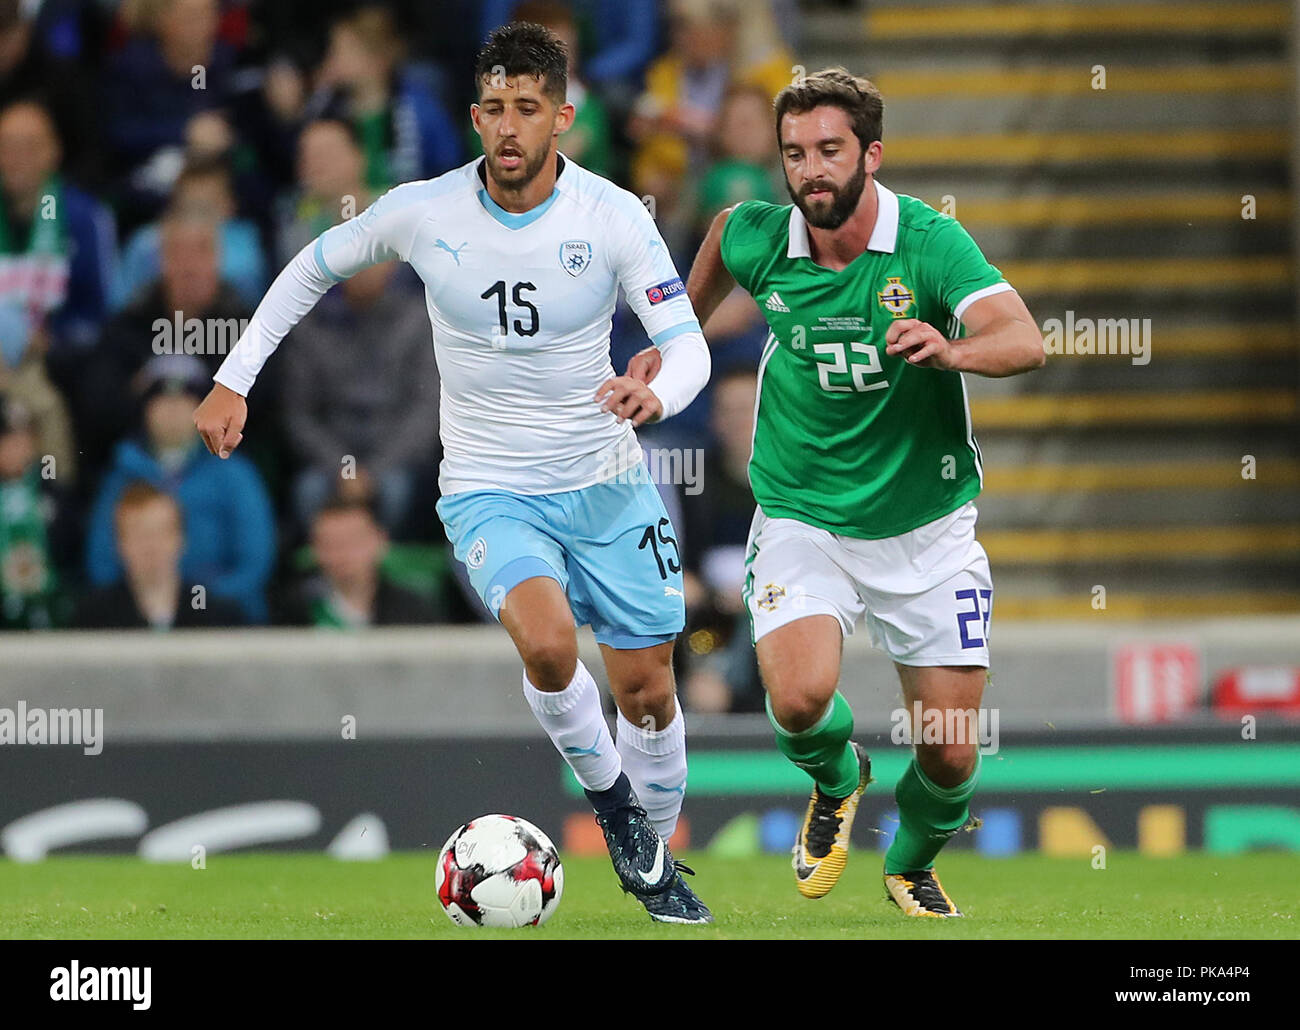 Israel's Dor Micha (left) and Northern Ireland's Will Grigg battle for the ball during the International Friendly at Windsor Park, Belfast PRESS ASSOCIATION Photo. Picture date: Tuesday September 11, 2018. See PA story SOCCER N Ireland. Photo credit should read: Liam McBurney/PA Wire. during the International Friendly at Windsor Park, Belfast PRESS ASSOCIATION Photo. Picture date: Tuesday September 11, 2018. See PA story SOCCER N Ireland. Photo credit should read: Liam McBurney/PA Wire Stock Photo